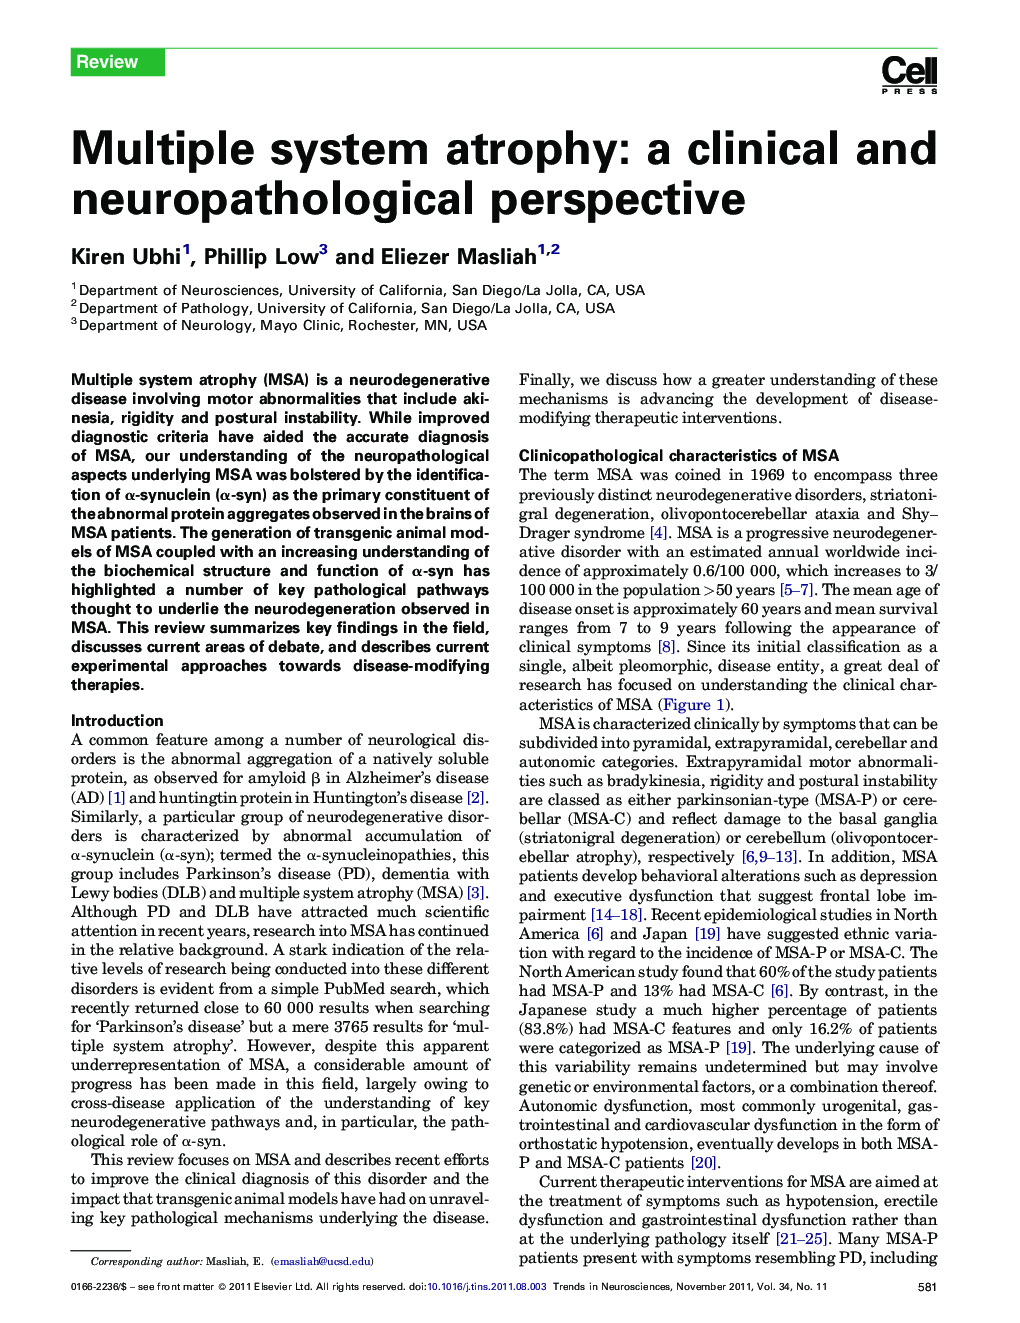 Multiple system atrophy: a clinical and neuropathological perspective